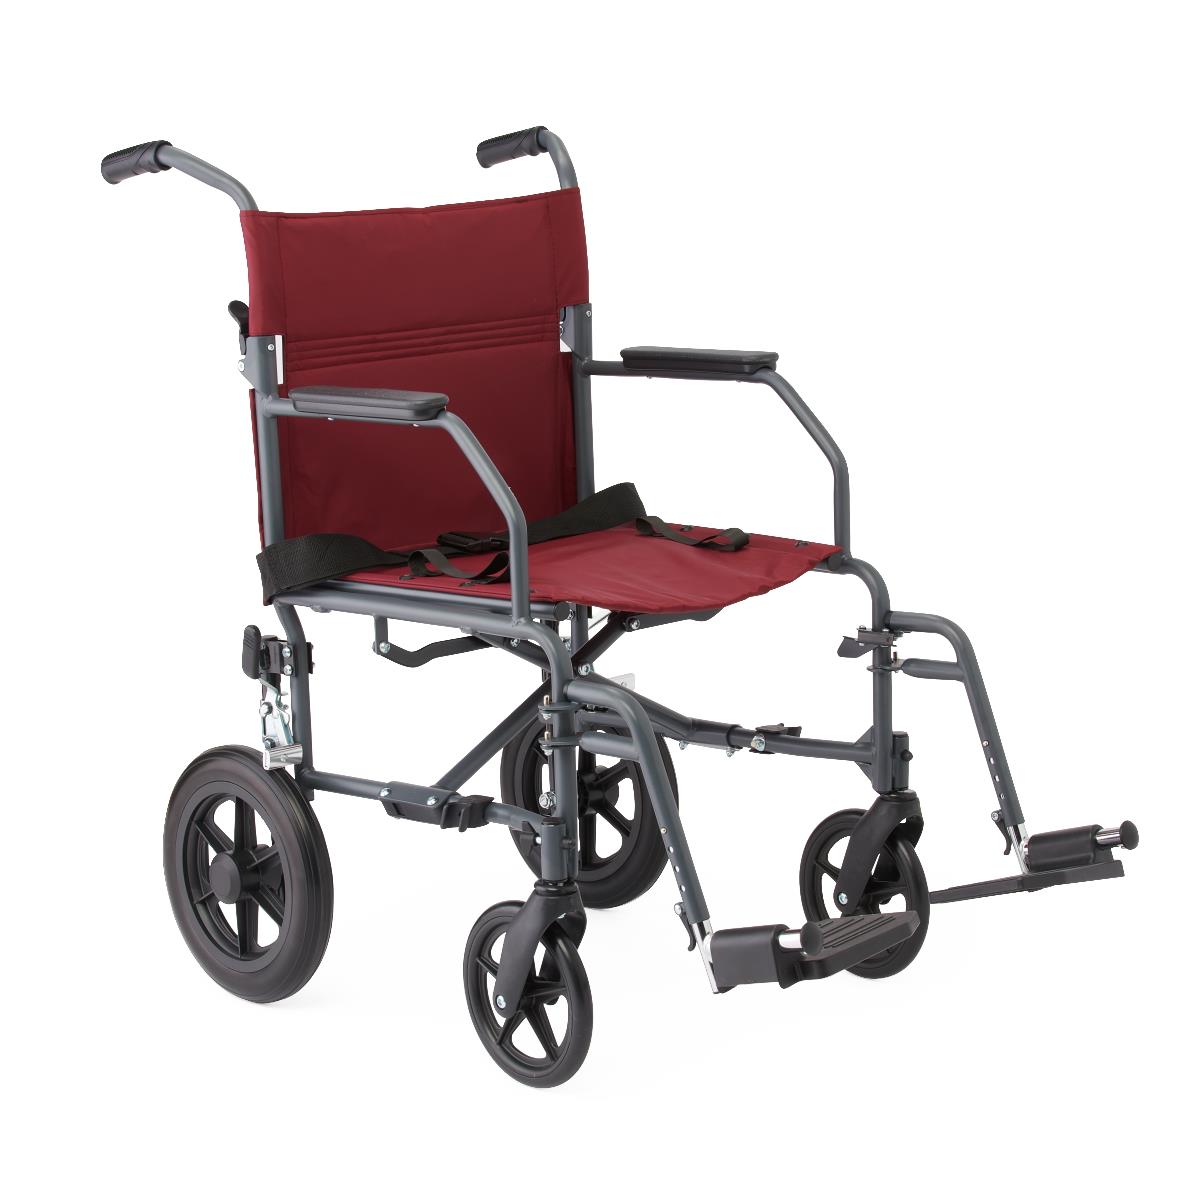 Burgundy/Gray Patient Safety & Mobility - MEDLINE - Wasatch Medical Supply